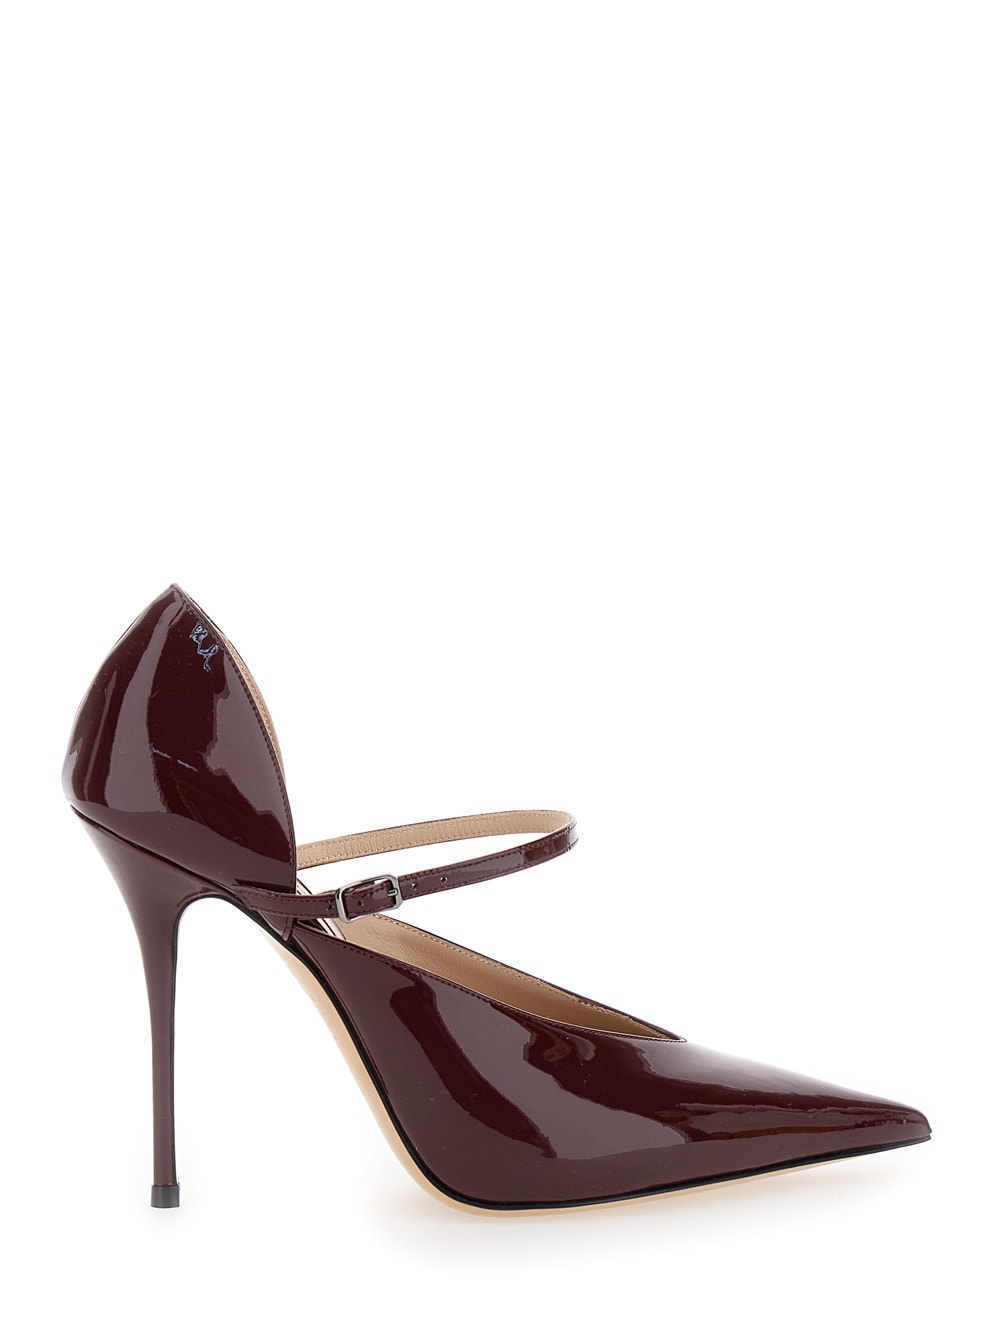 Casadei Scarlet Jolly Bordeaux Pumps With Stiletto Heel In Patent Leather Woman